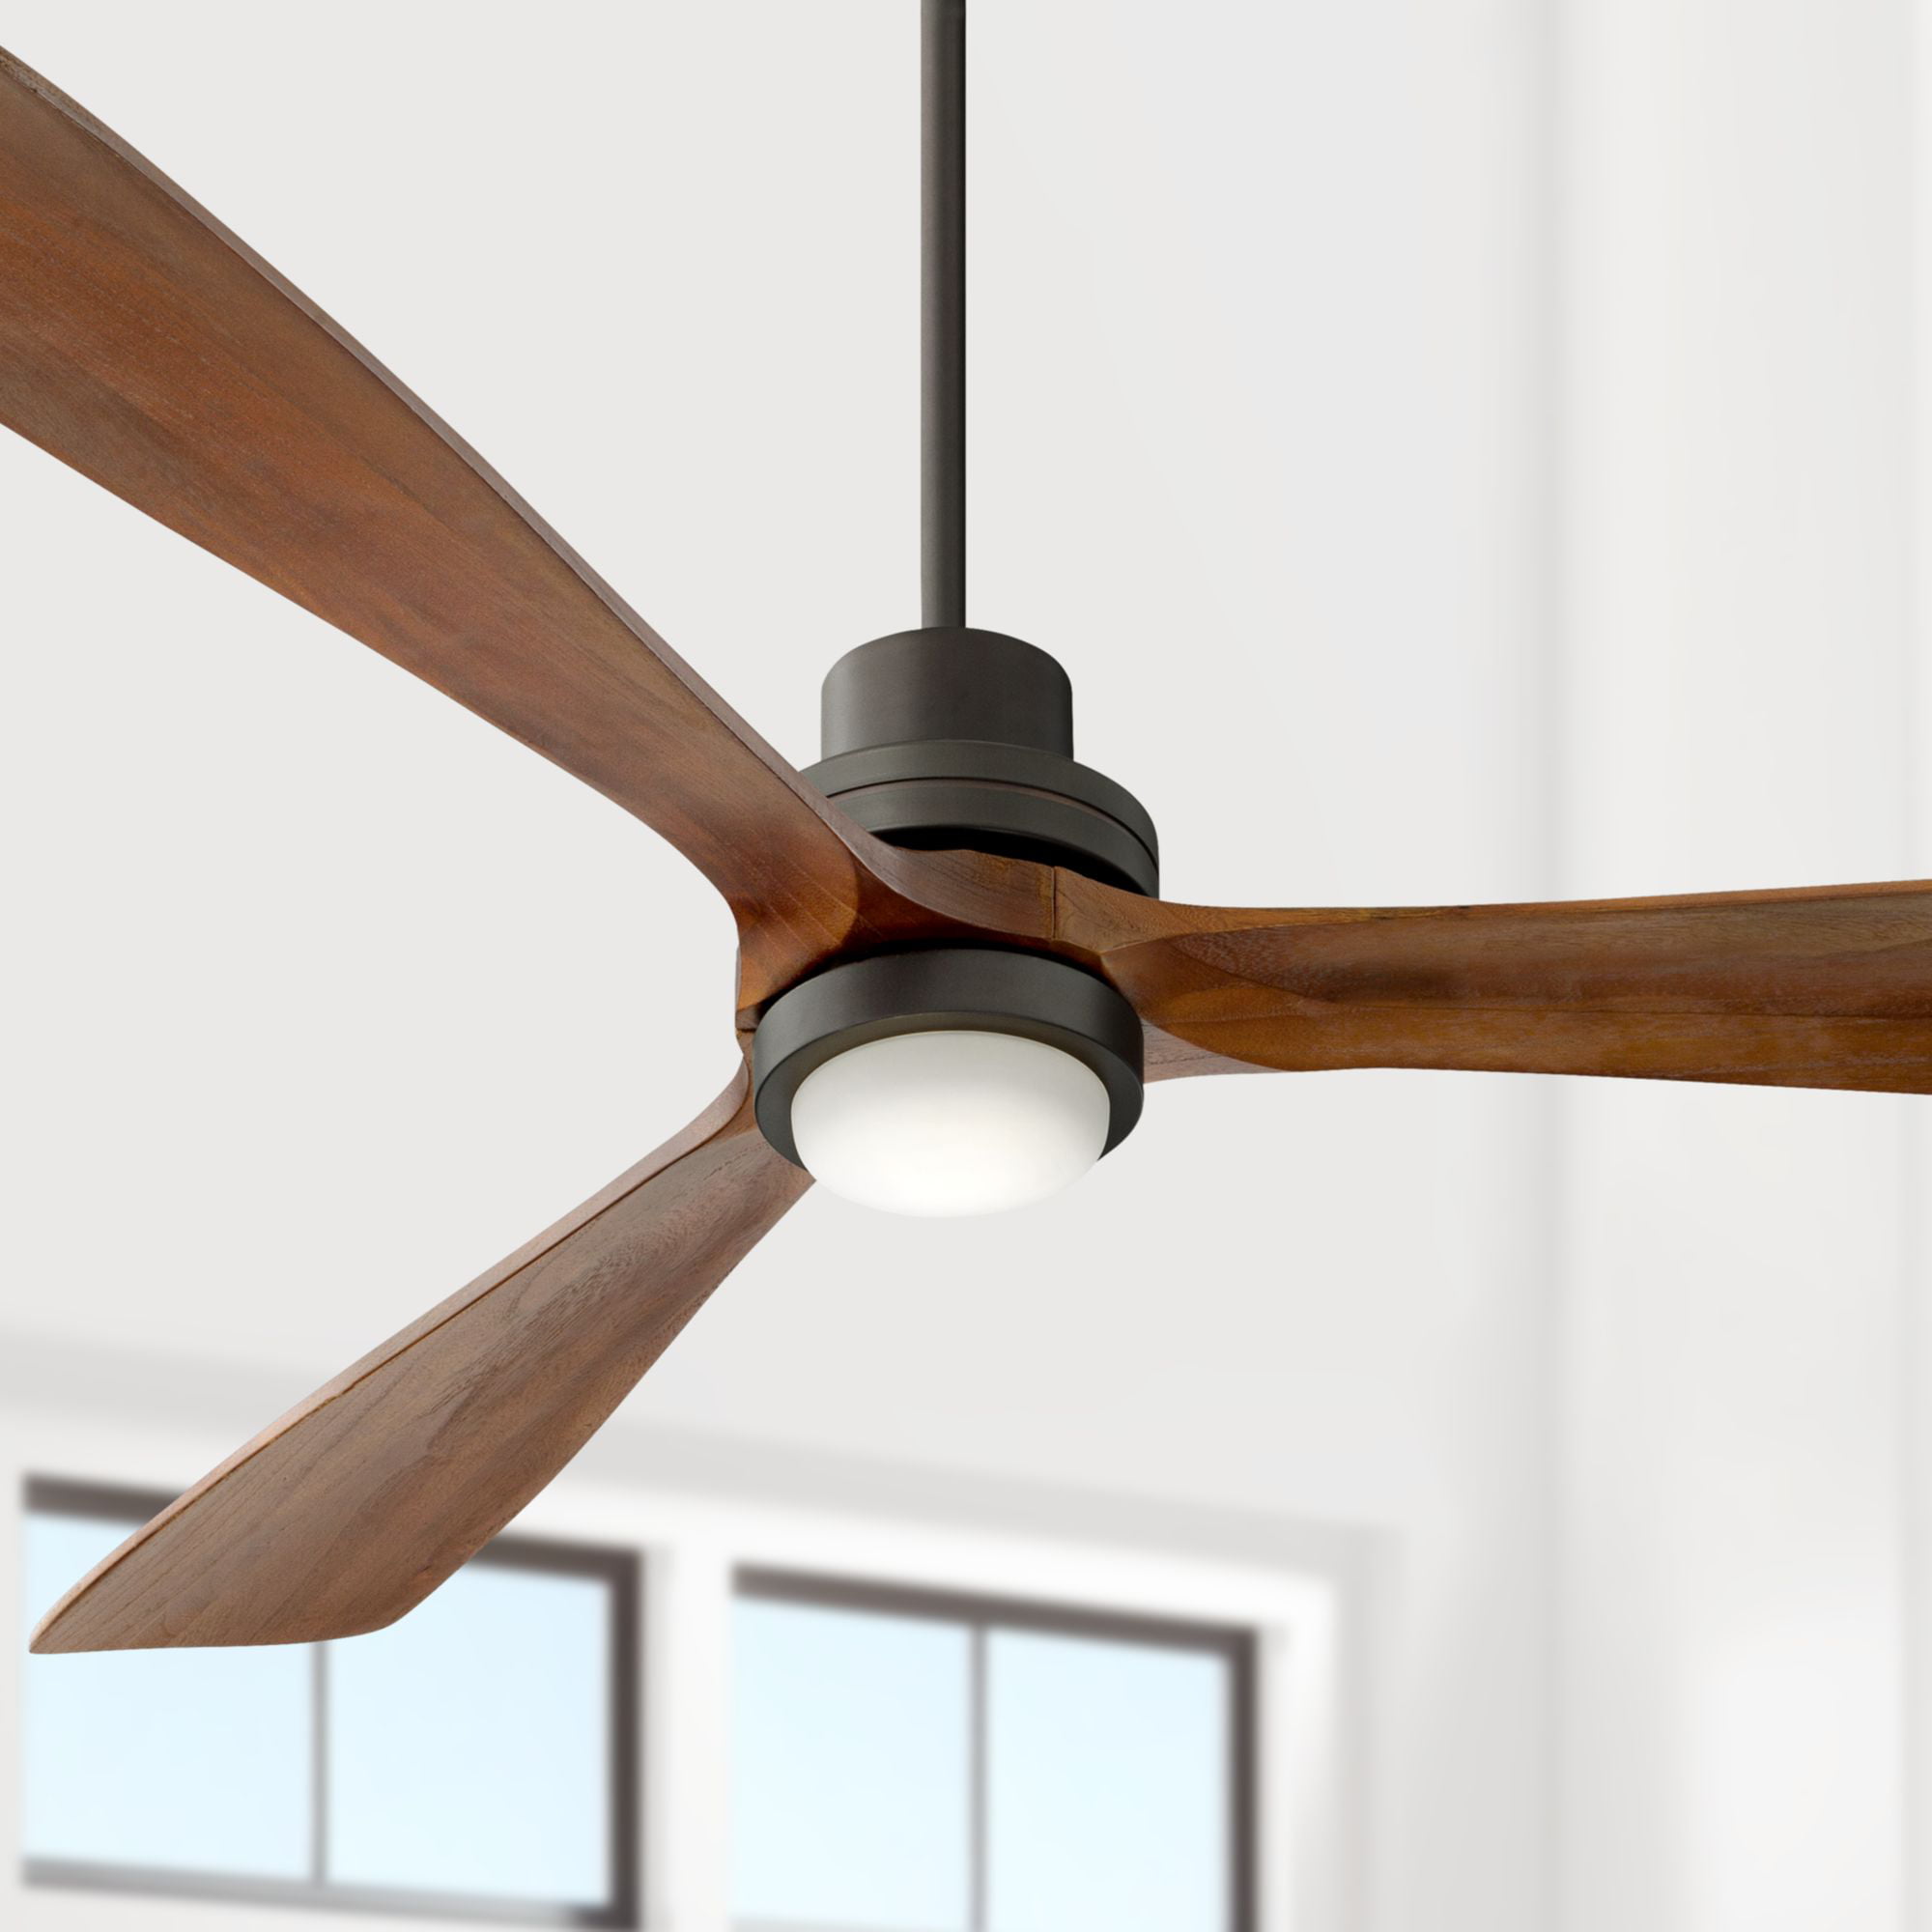 4 Wooden Blades E26x5 Light Fixture for Living Room Bedroom Modern Creative Metal Fandelier Ceiling Fan with Unique 360° Rotation Bulb Base 48Inch Matte Black Ceiling Fan with Remote